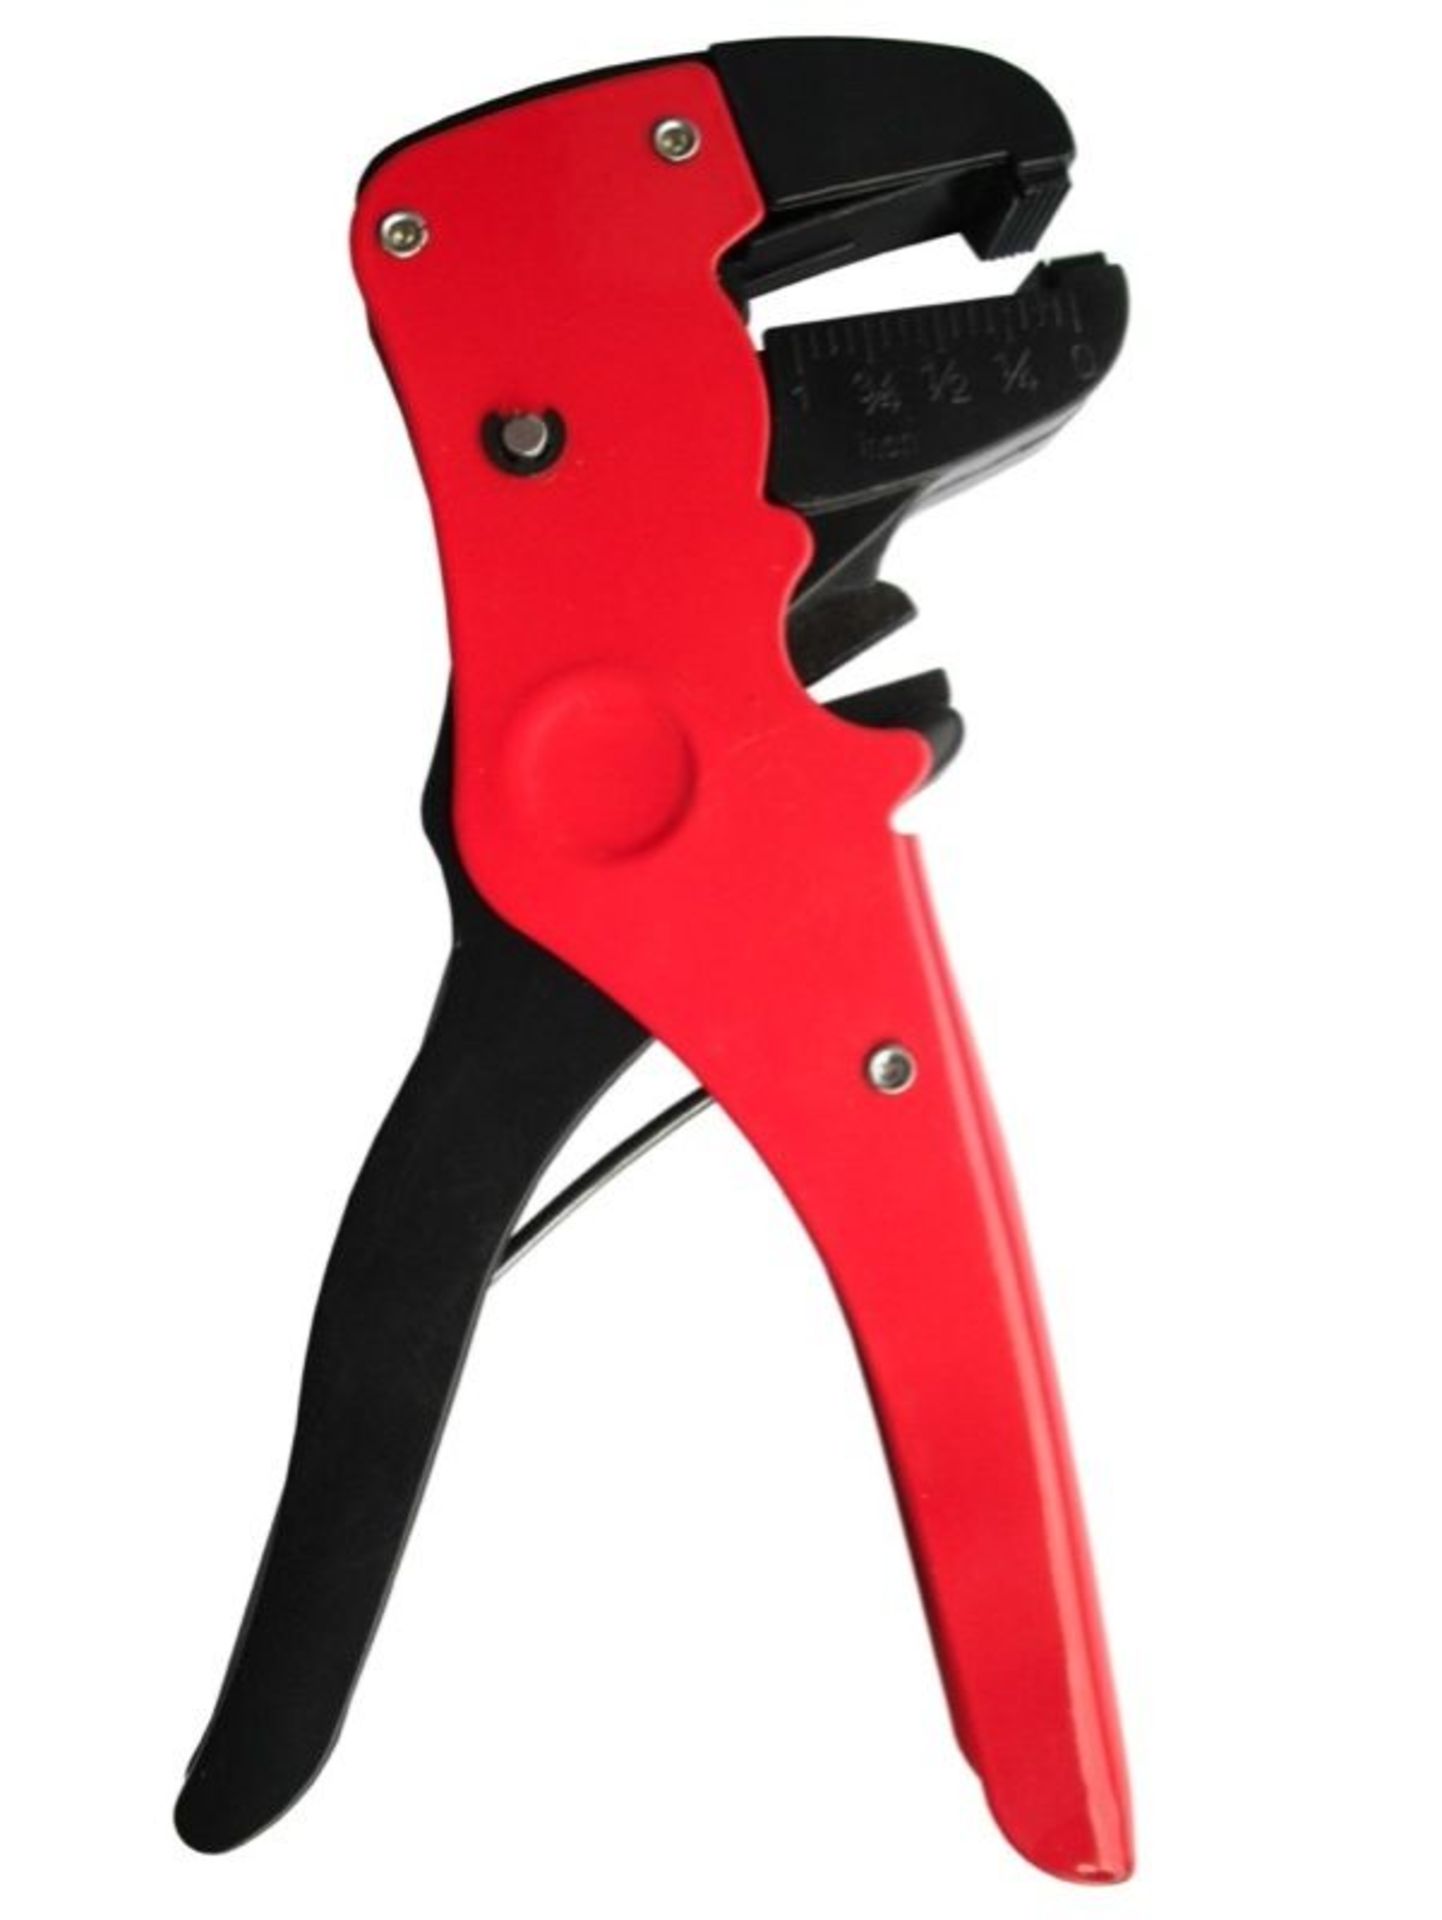 + VAT Brand New Automatic Wire Stripper And Cable Cutter For 0.5 mm to 4.0 mm Wire - Suitable For